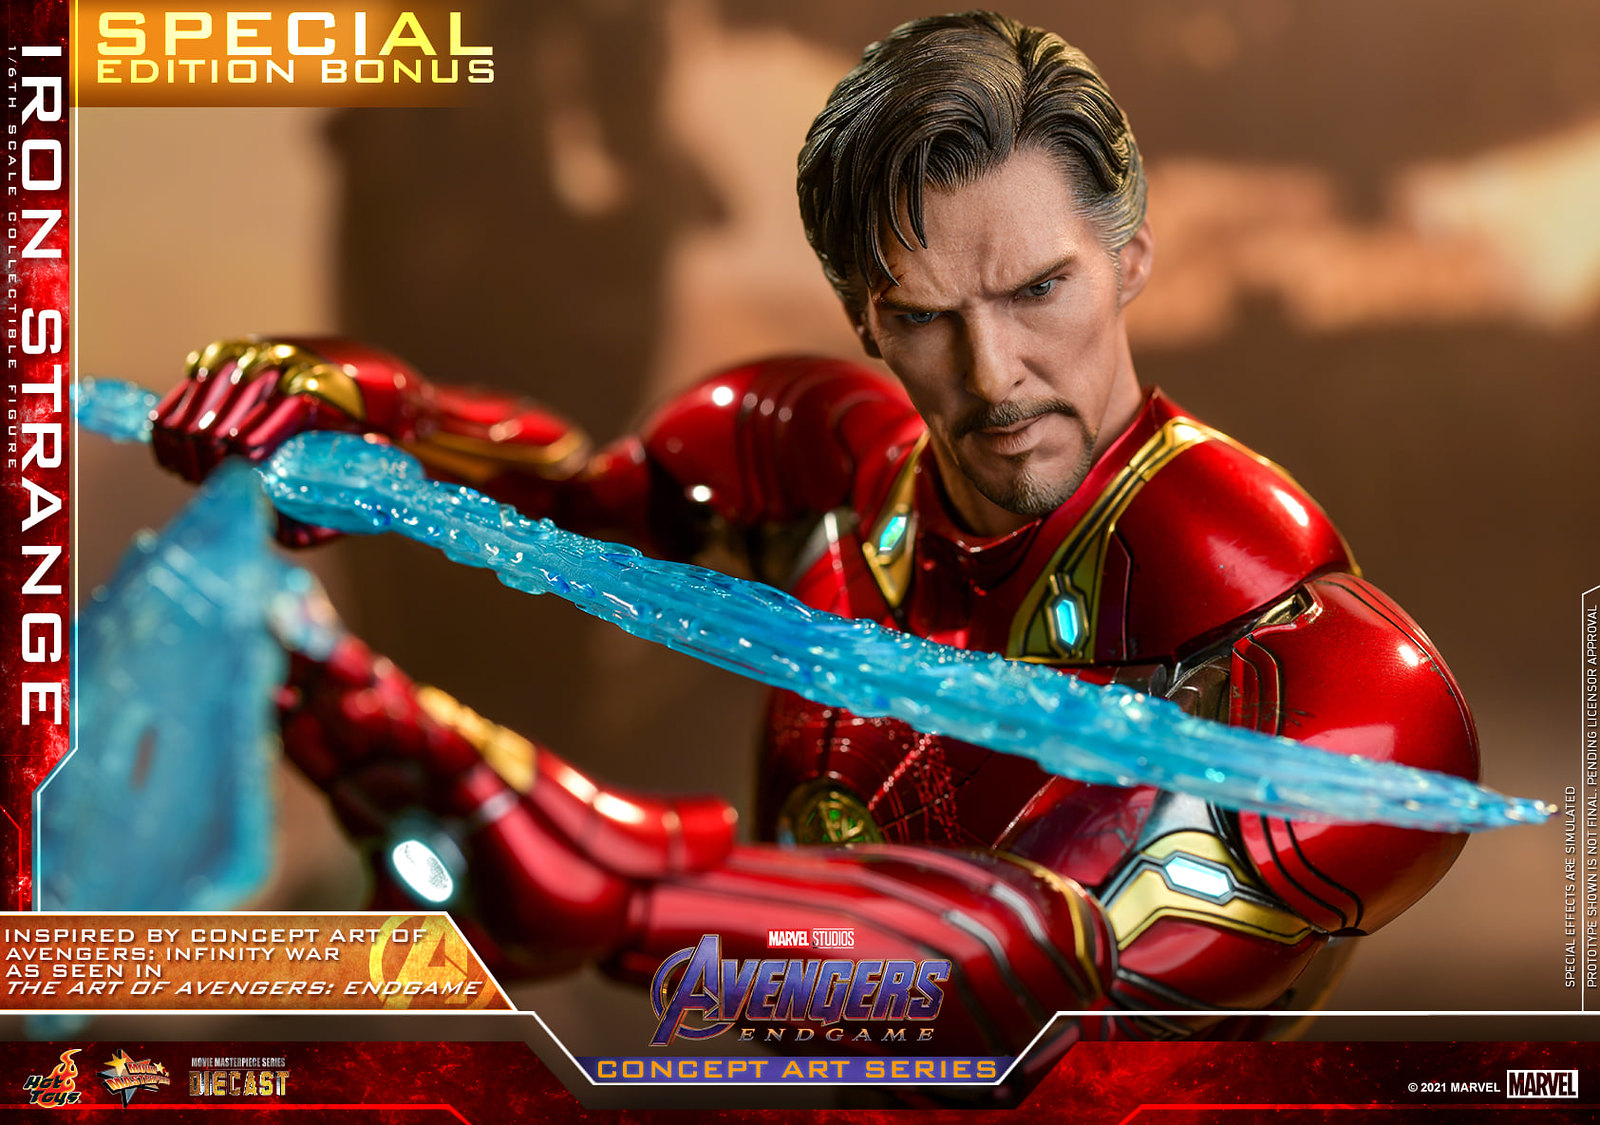 NEW PRODUCT: Hot Toys Avengers: Endgame (Concept Art Series) - 1/6th scale Iron Strange Collectible Figure 51311952054_aa5c0eeb57_h